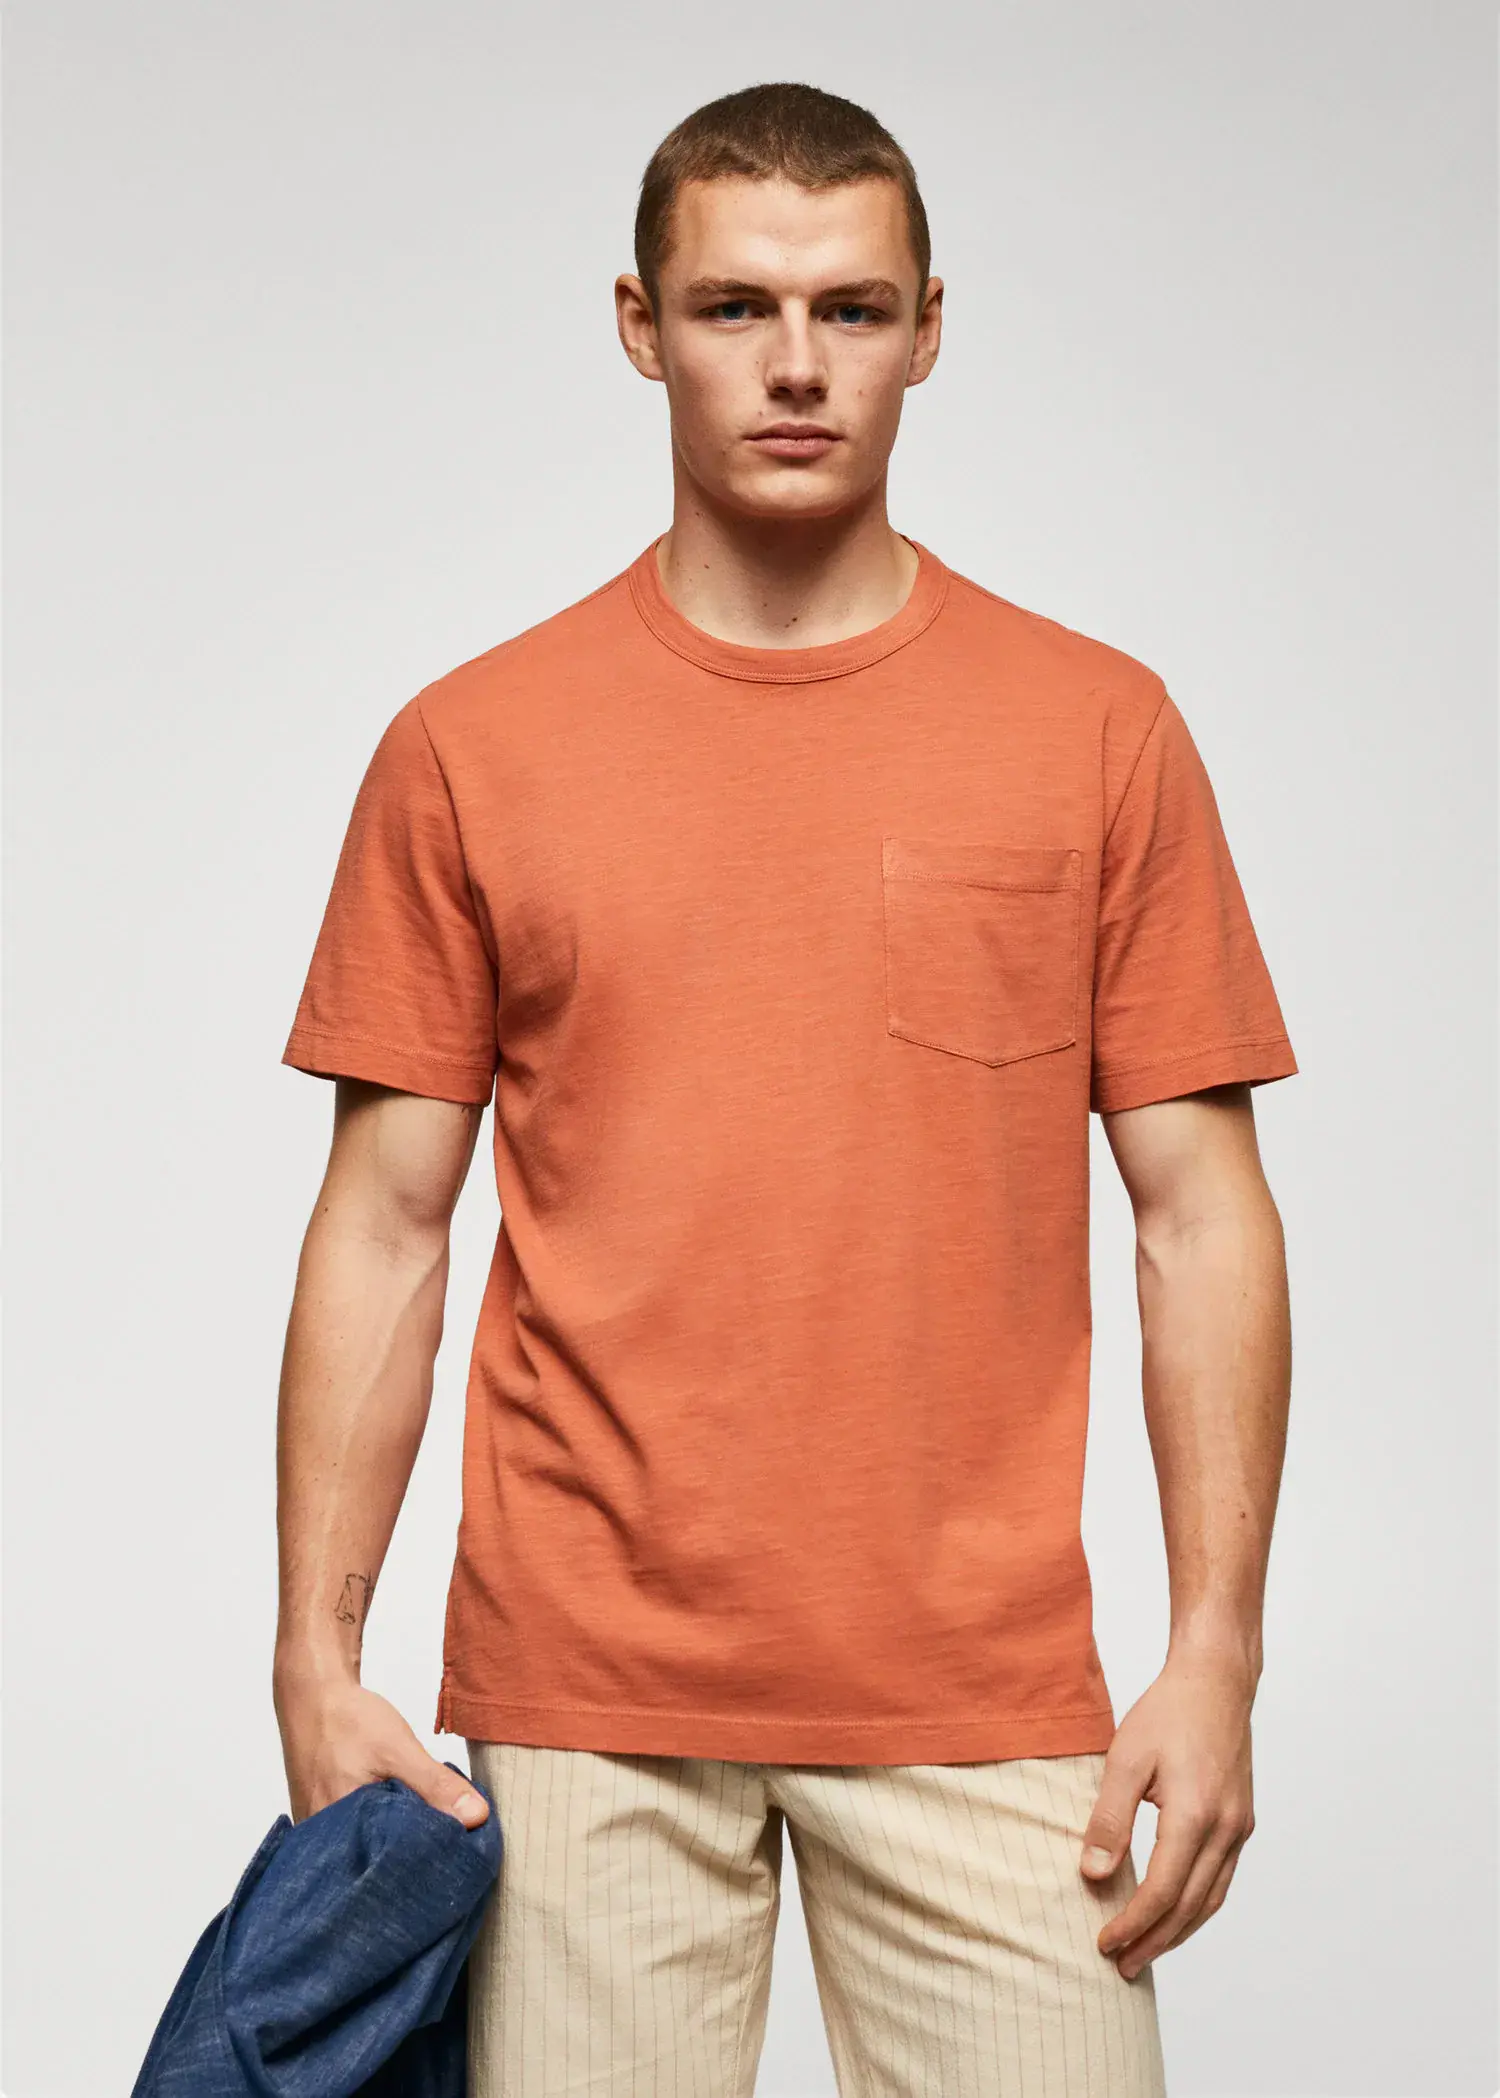 Mango 100% cotton t-shirt with pocket. a man wearing a t-shirt with a pocket. 